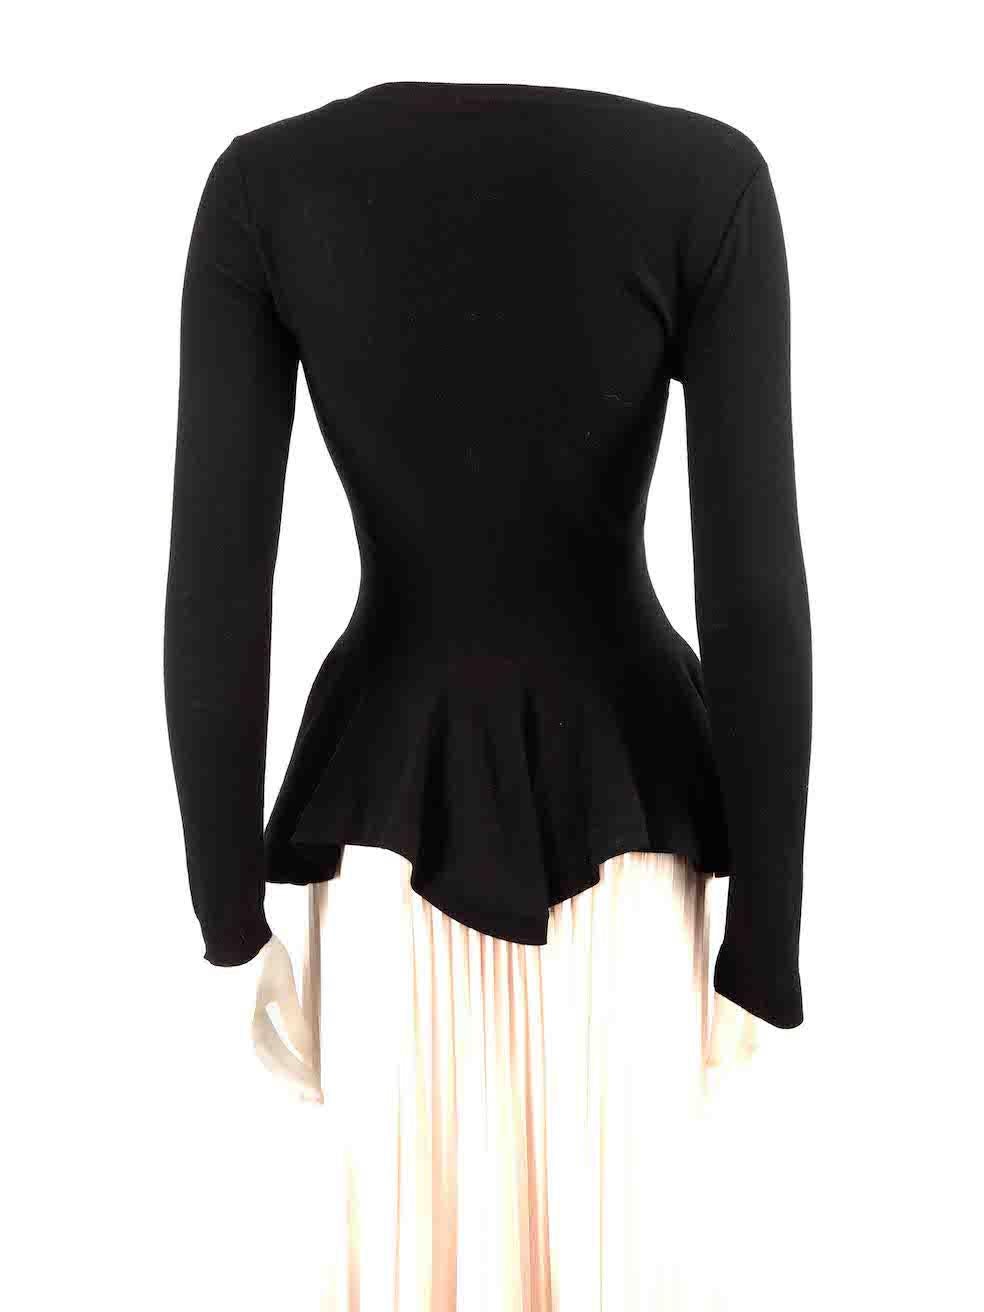 Alexander McQueen Black Wool Peplum Ruffled Top Size S In Good Condition For Sale In London, GB